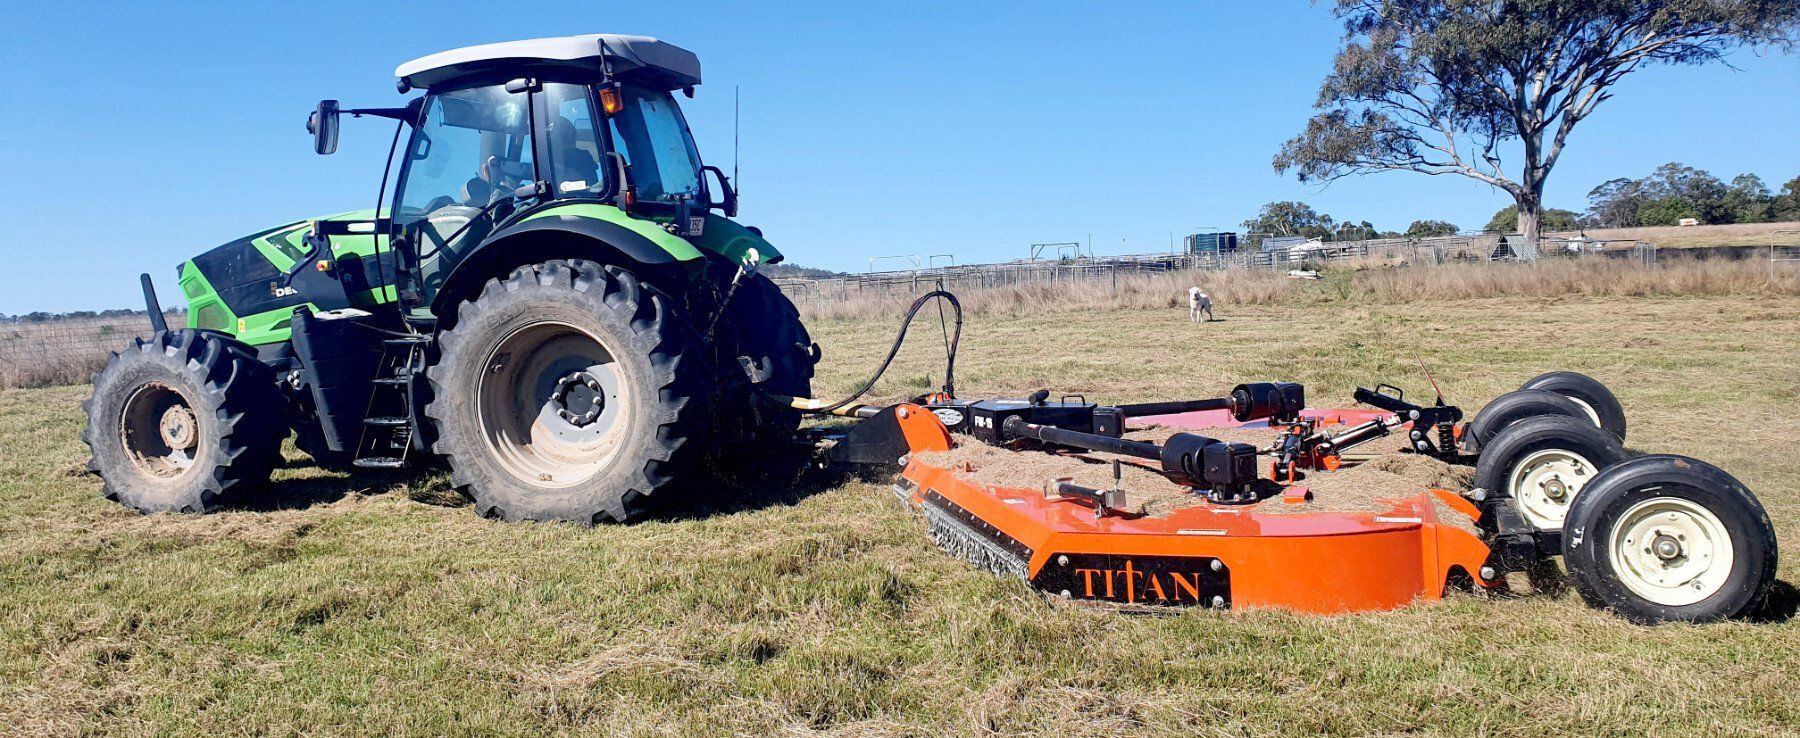 Tractor plus slashers for hire at QuikFence